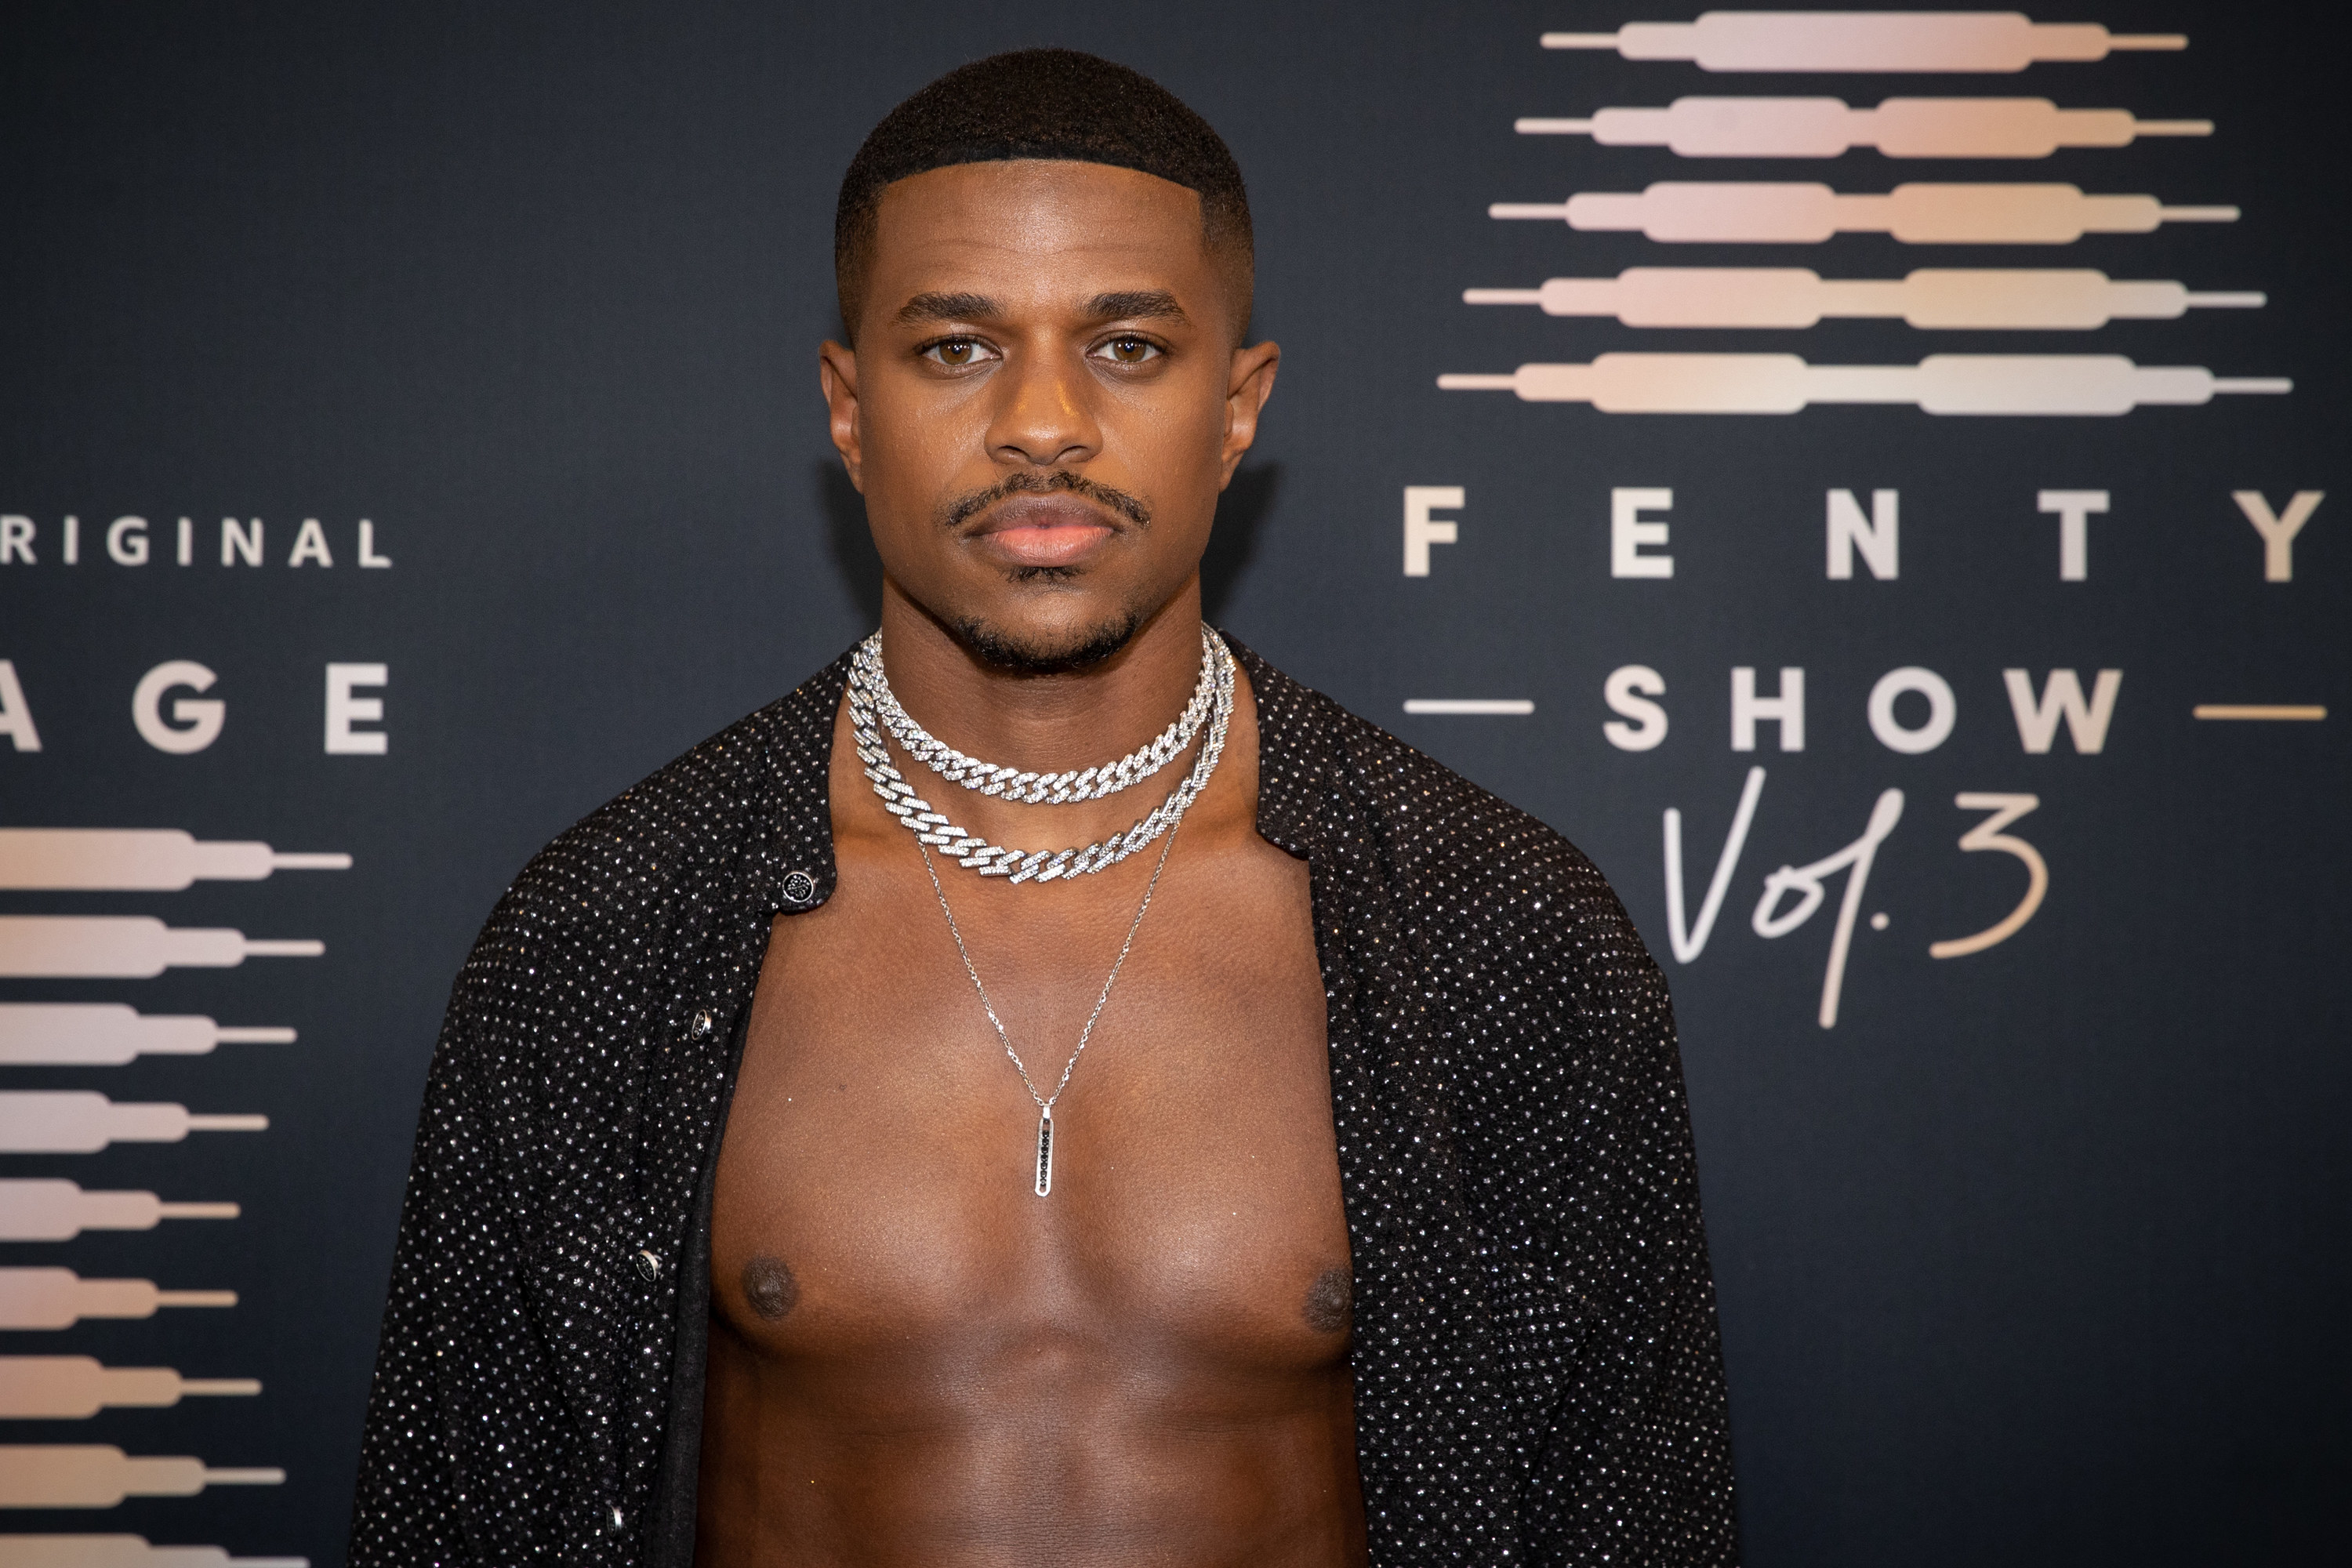 Jeremy bare-chested on the red carpet